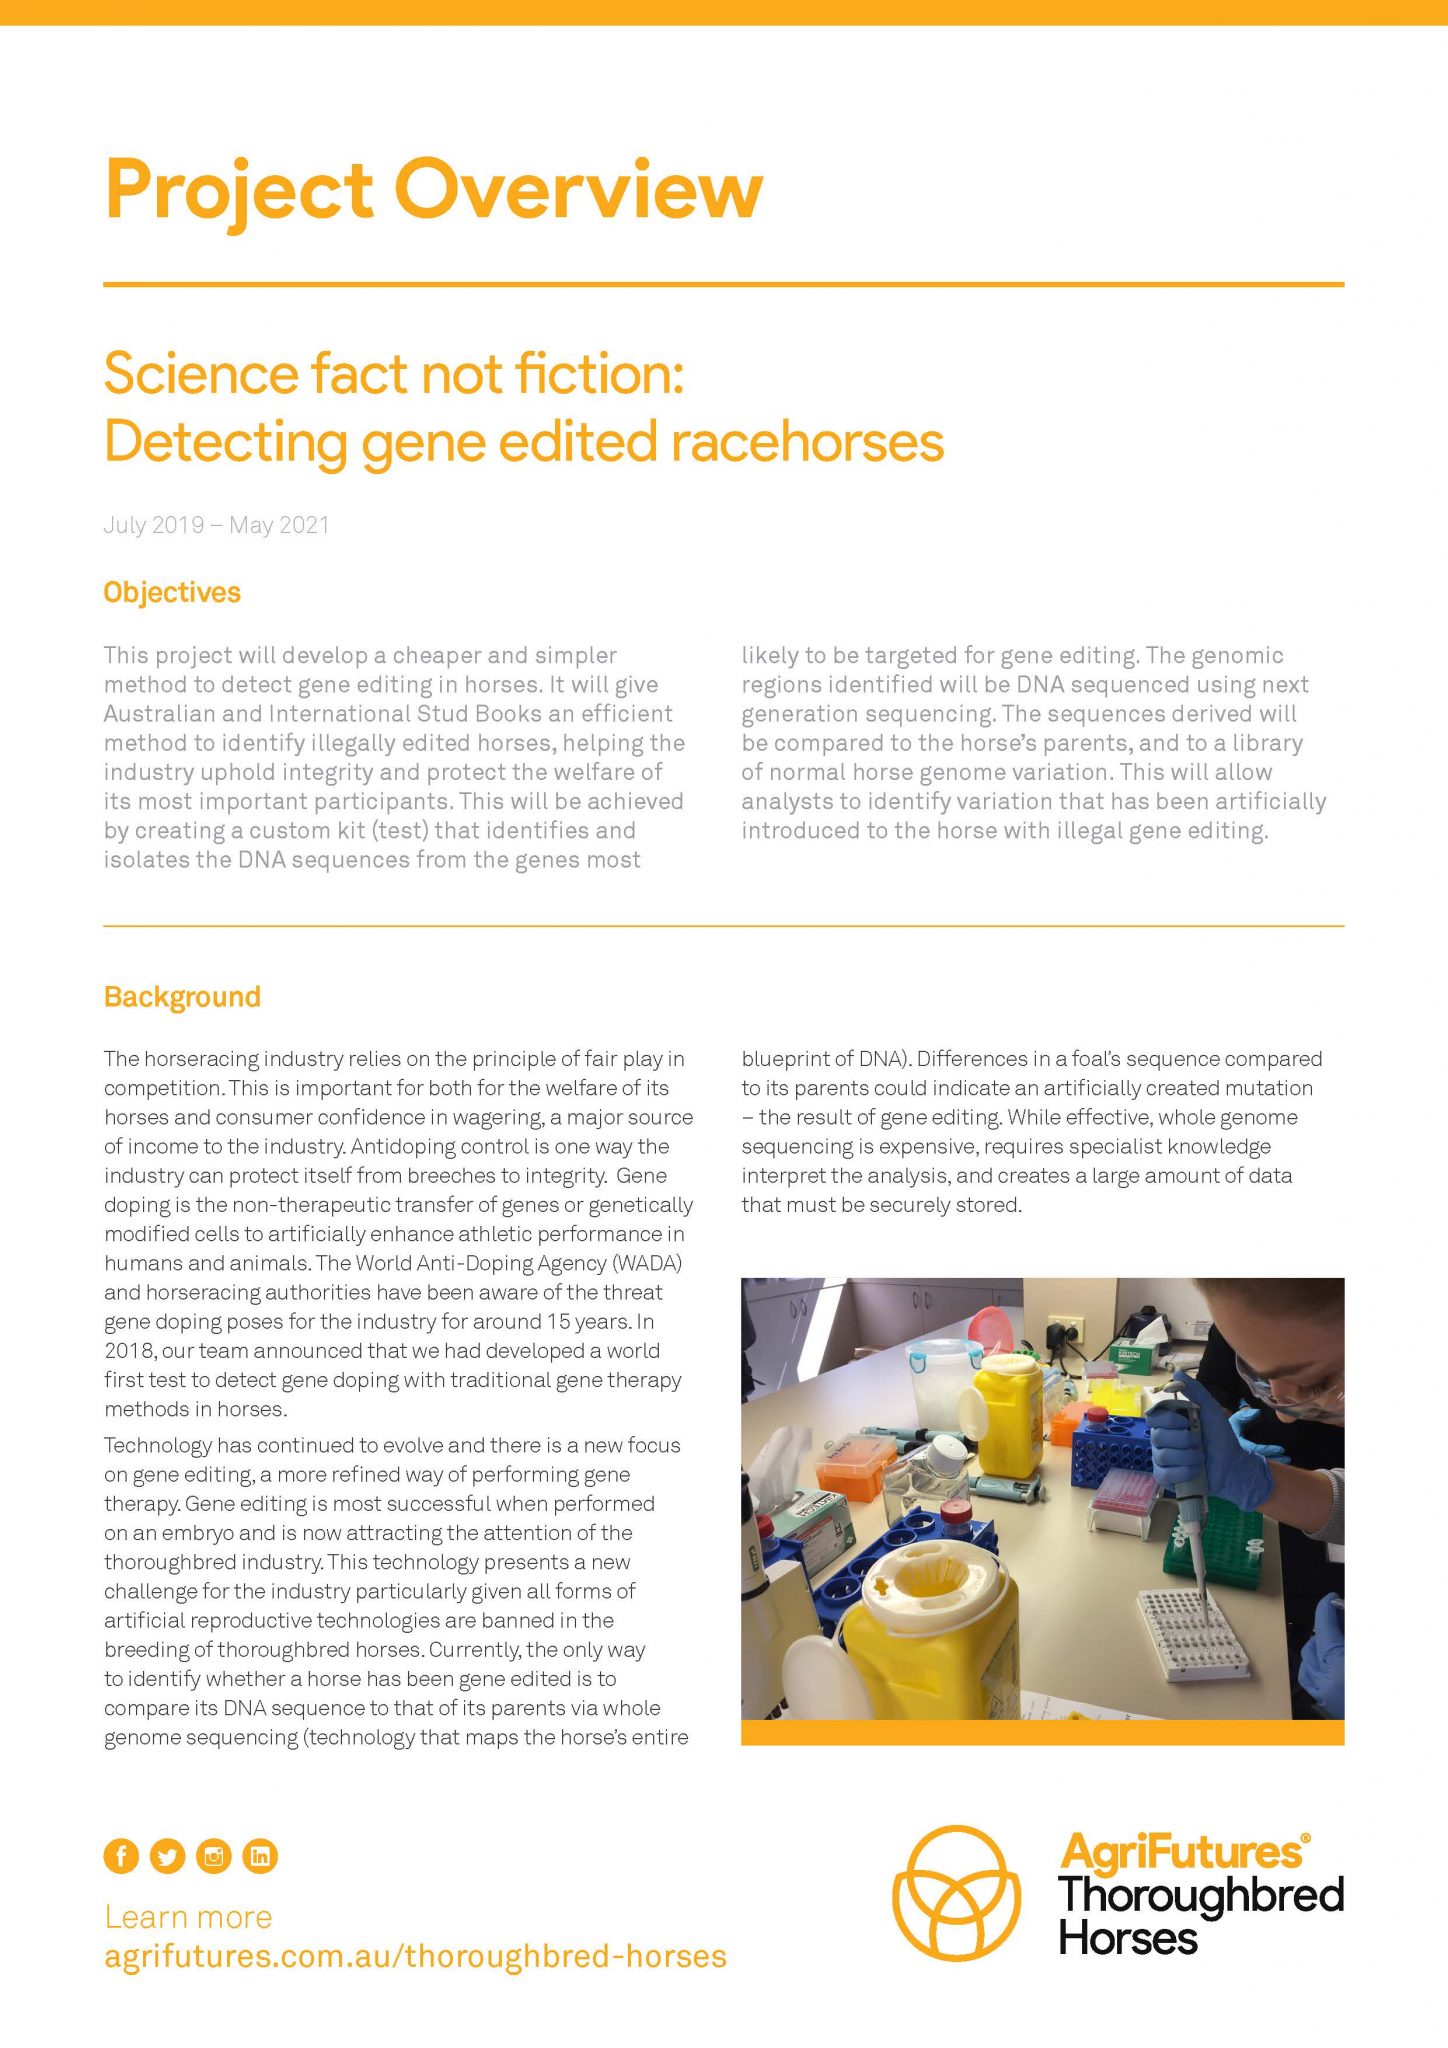 Project overview: Science fact not fiction - Detecting gene edited racehorses - image